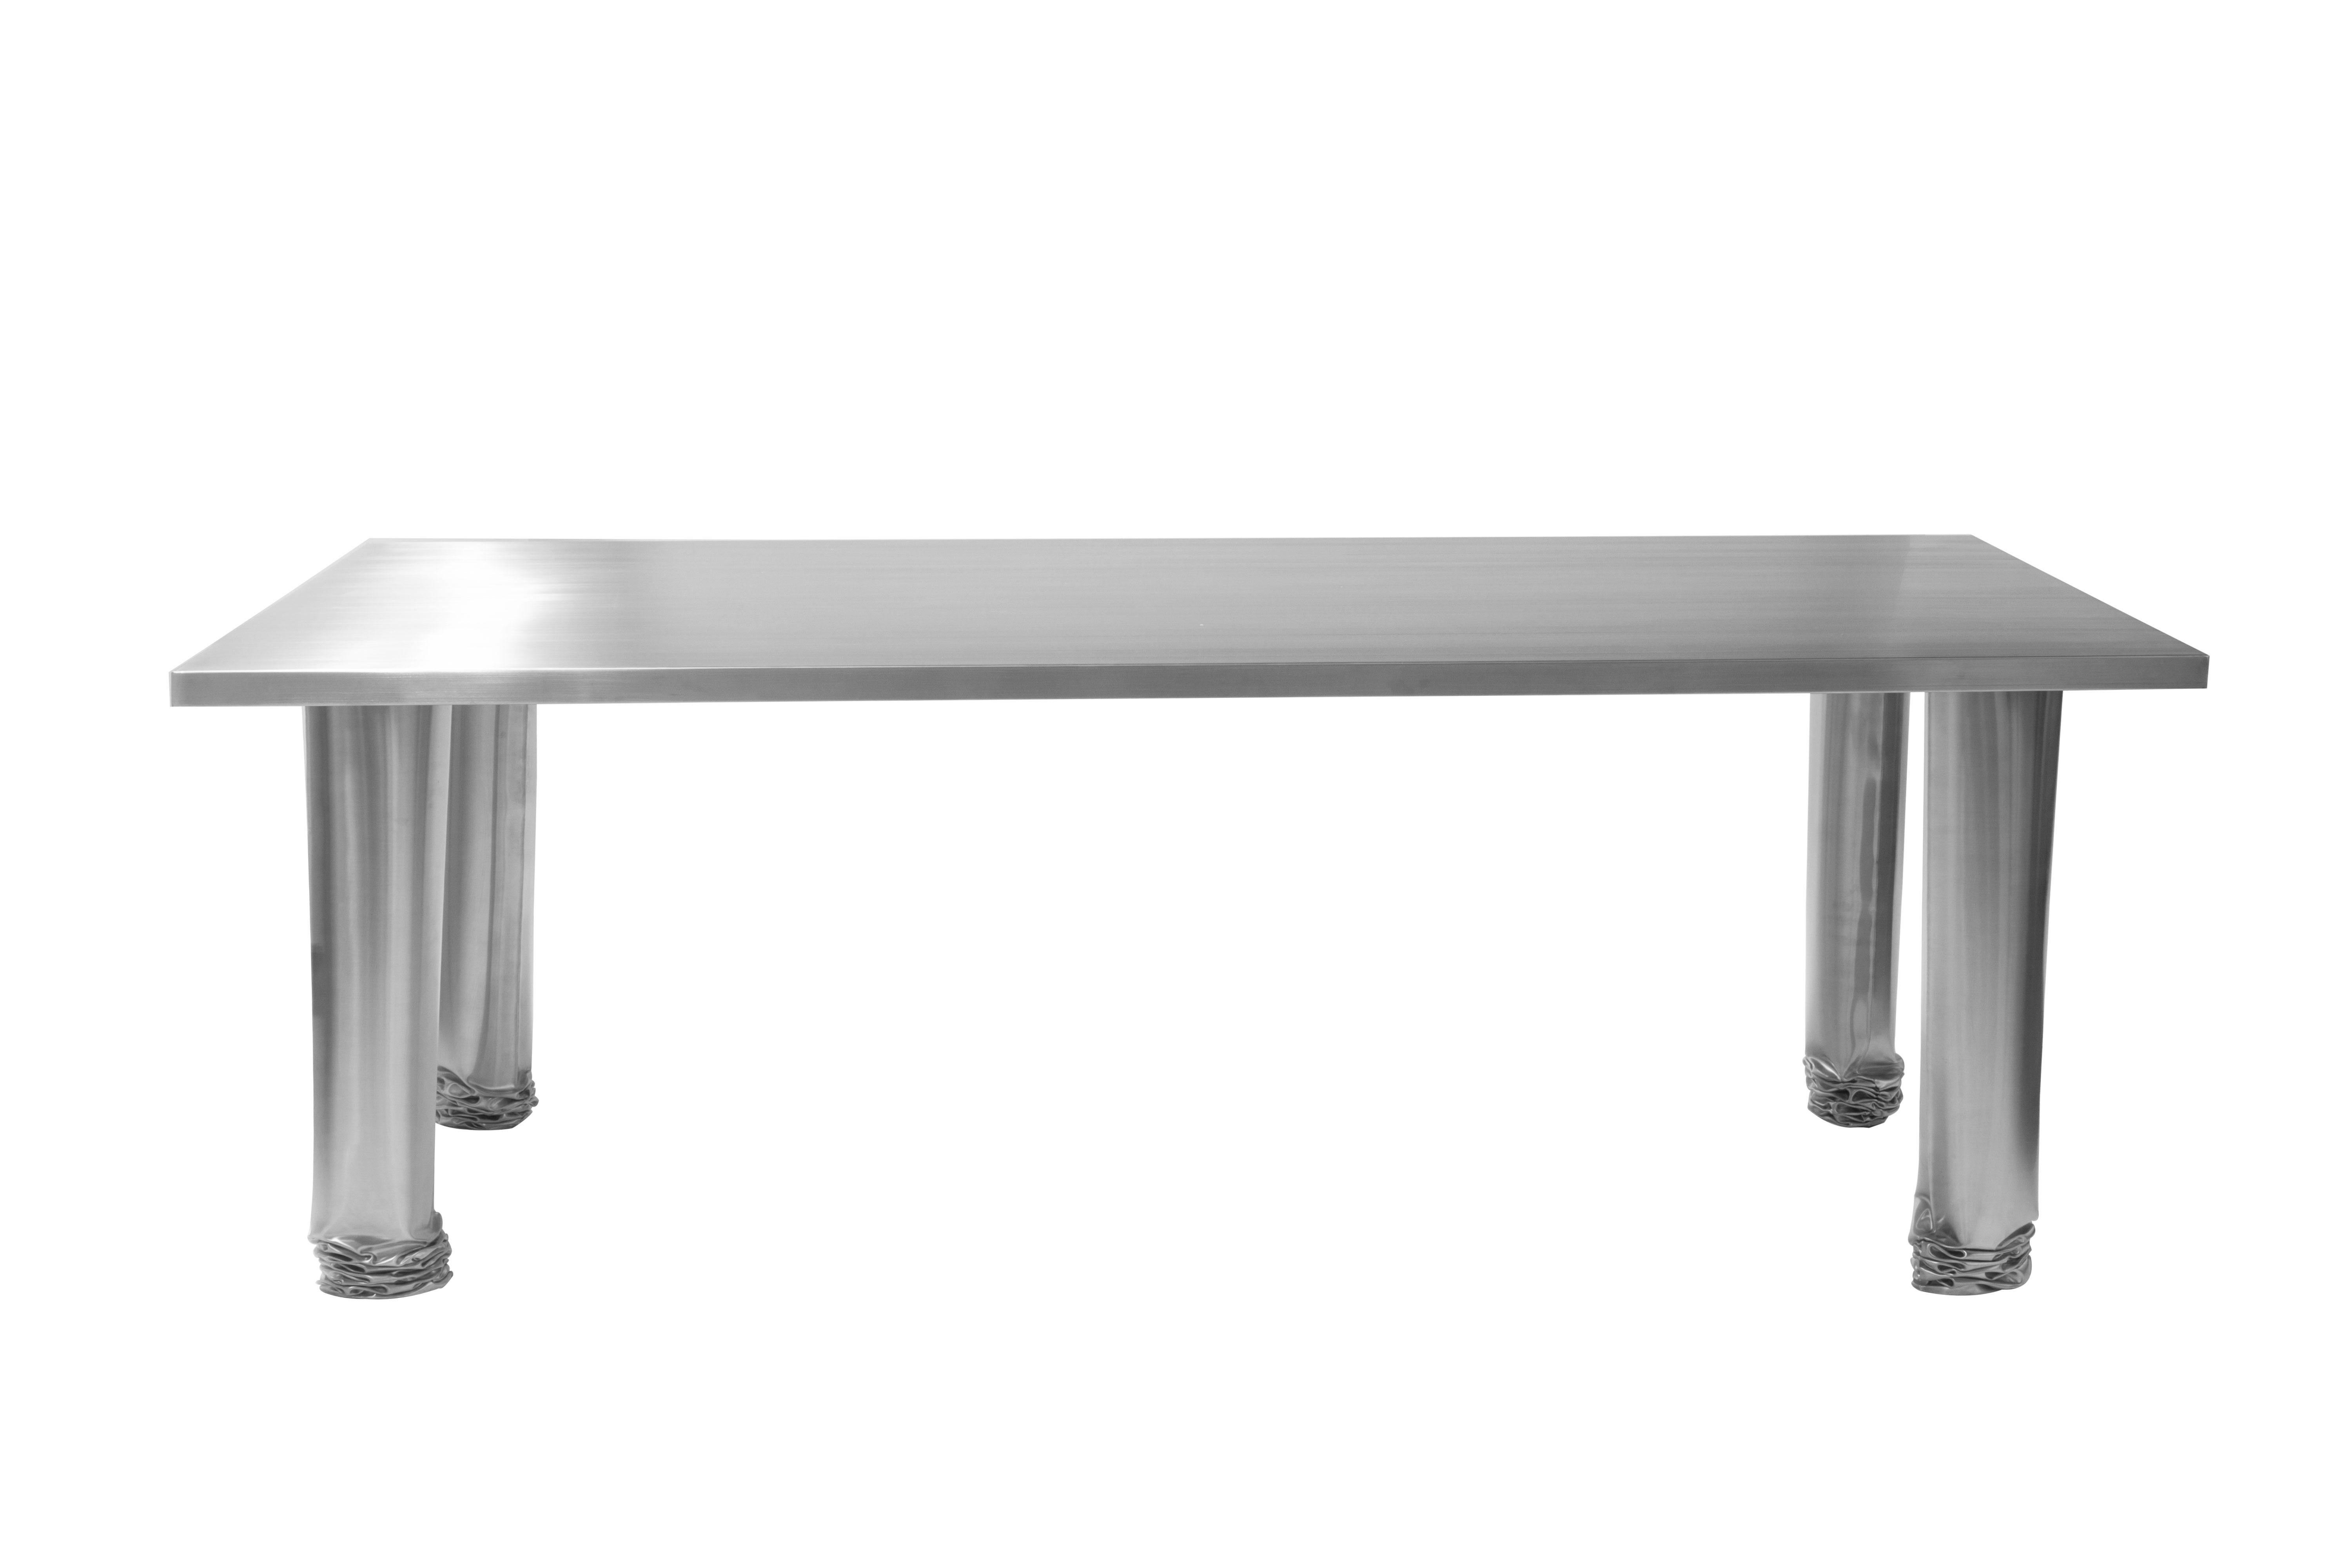 Crash table by Zieta
Dimensions: D 100 x W 220 x H 75 cm
Materials: Satin stainless steel.

Crash Table is the materialization of a “controlled loss of control”, when what appears to be accidental is in fact the result of a carefully planned